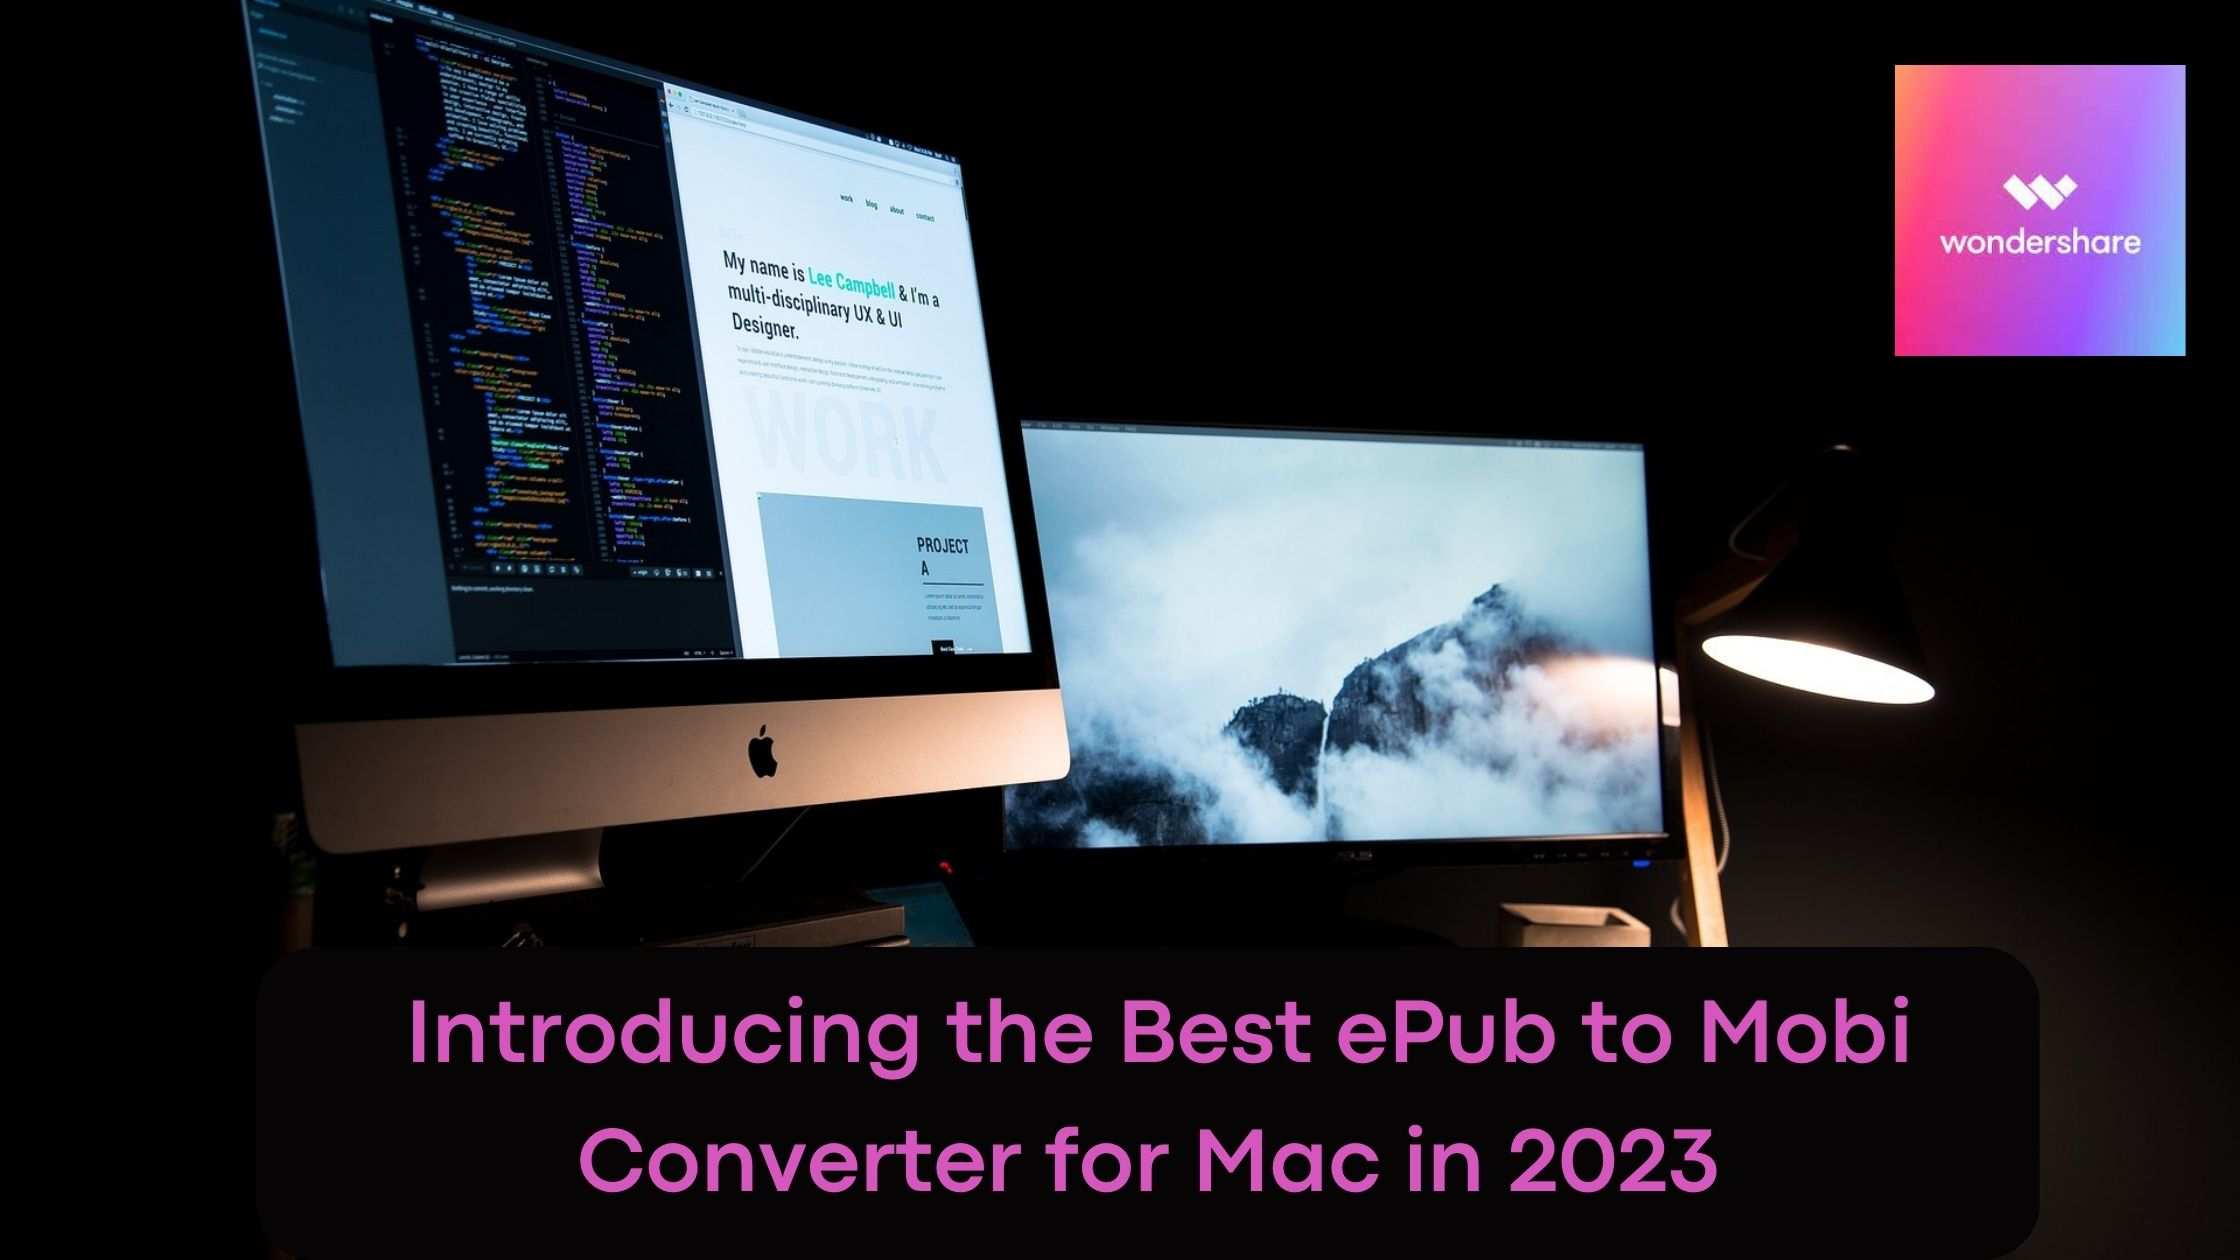 Introducing the Best ePub to Mobi Converter for Mac in 2023